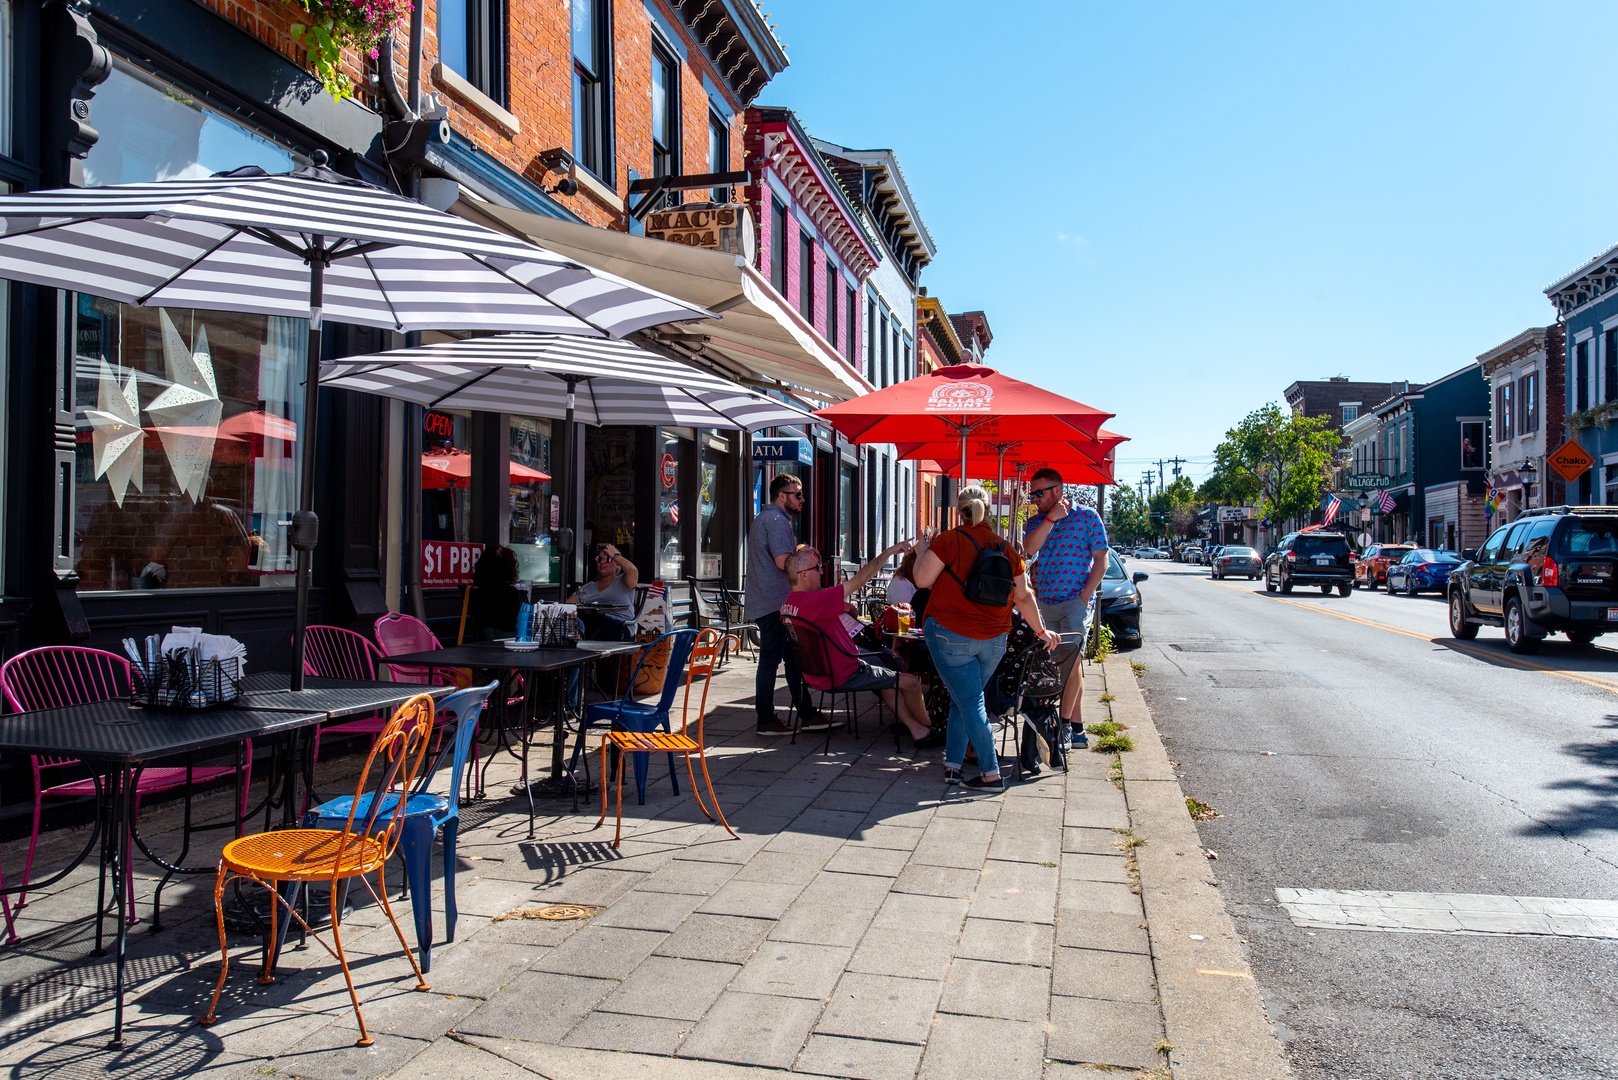 The Mainstrasse Area offers an endless variety of shopping and dining options